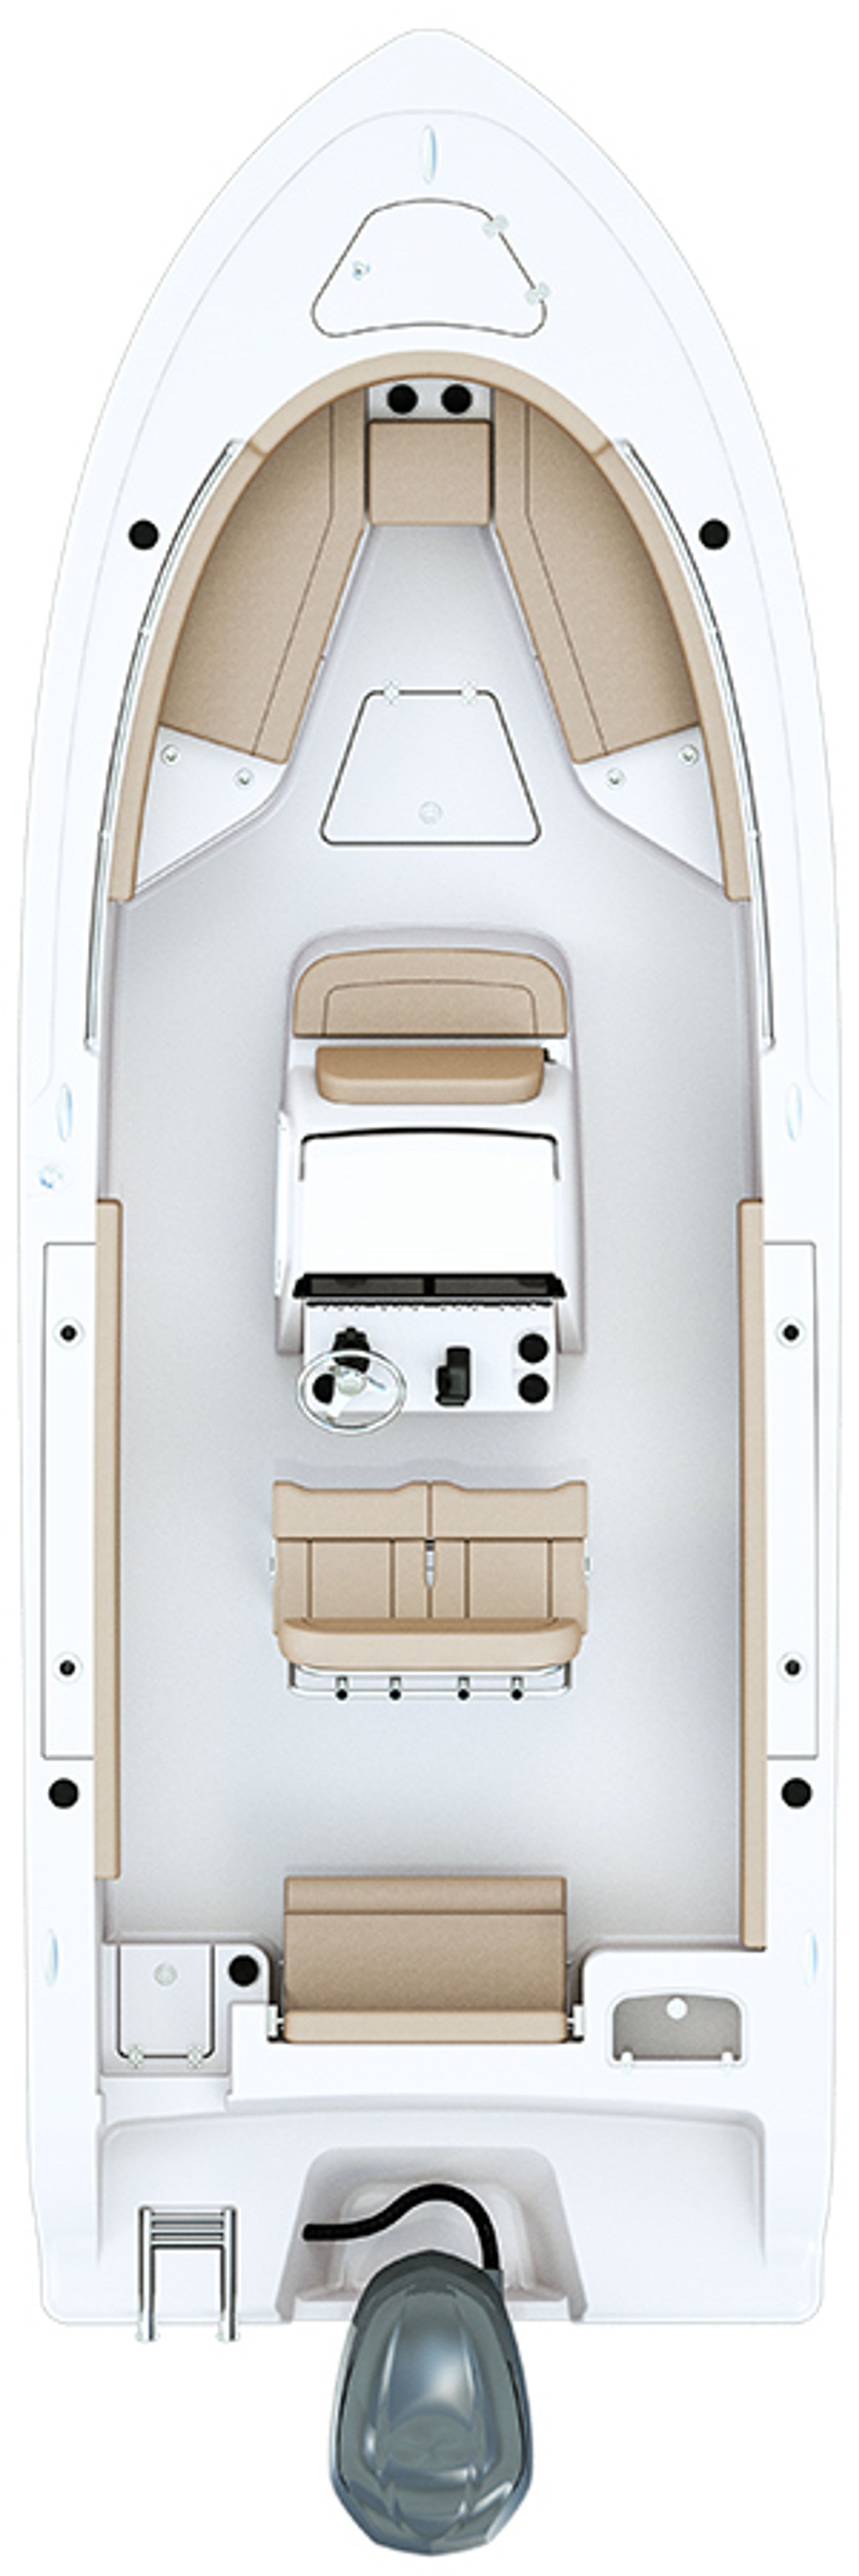 Overhead image of the 242-center-console